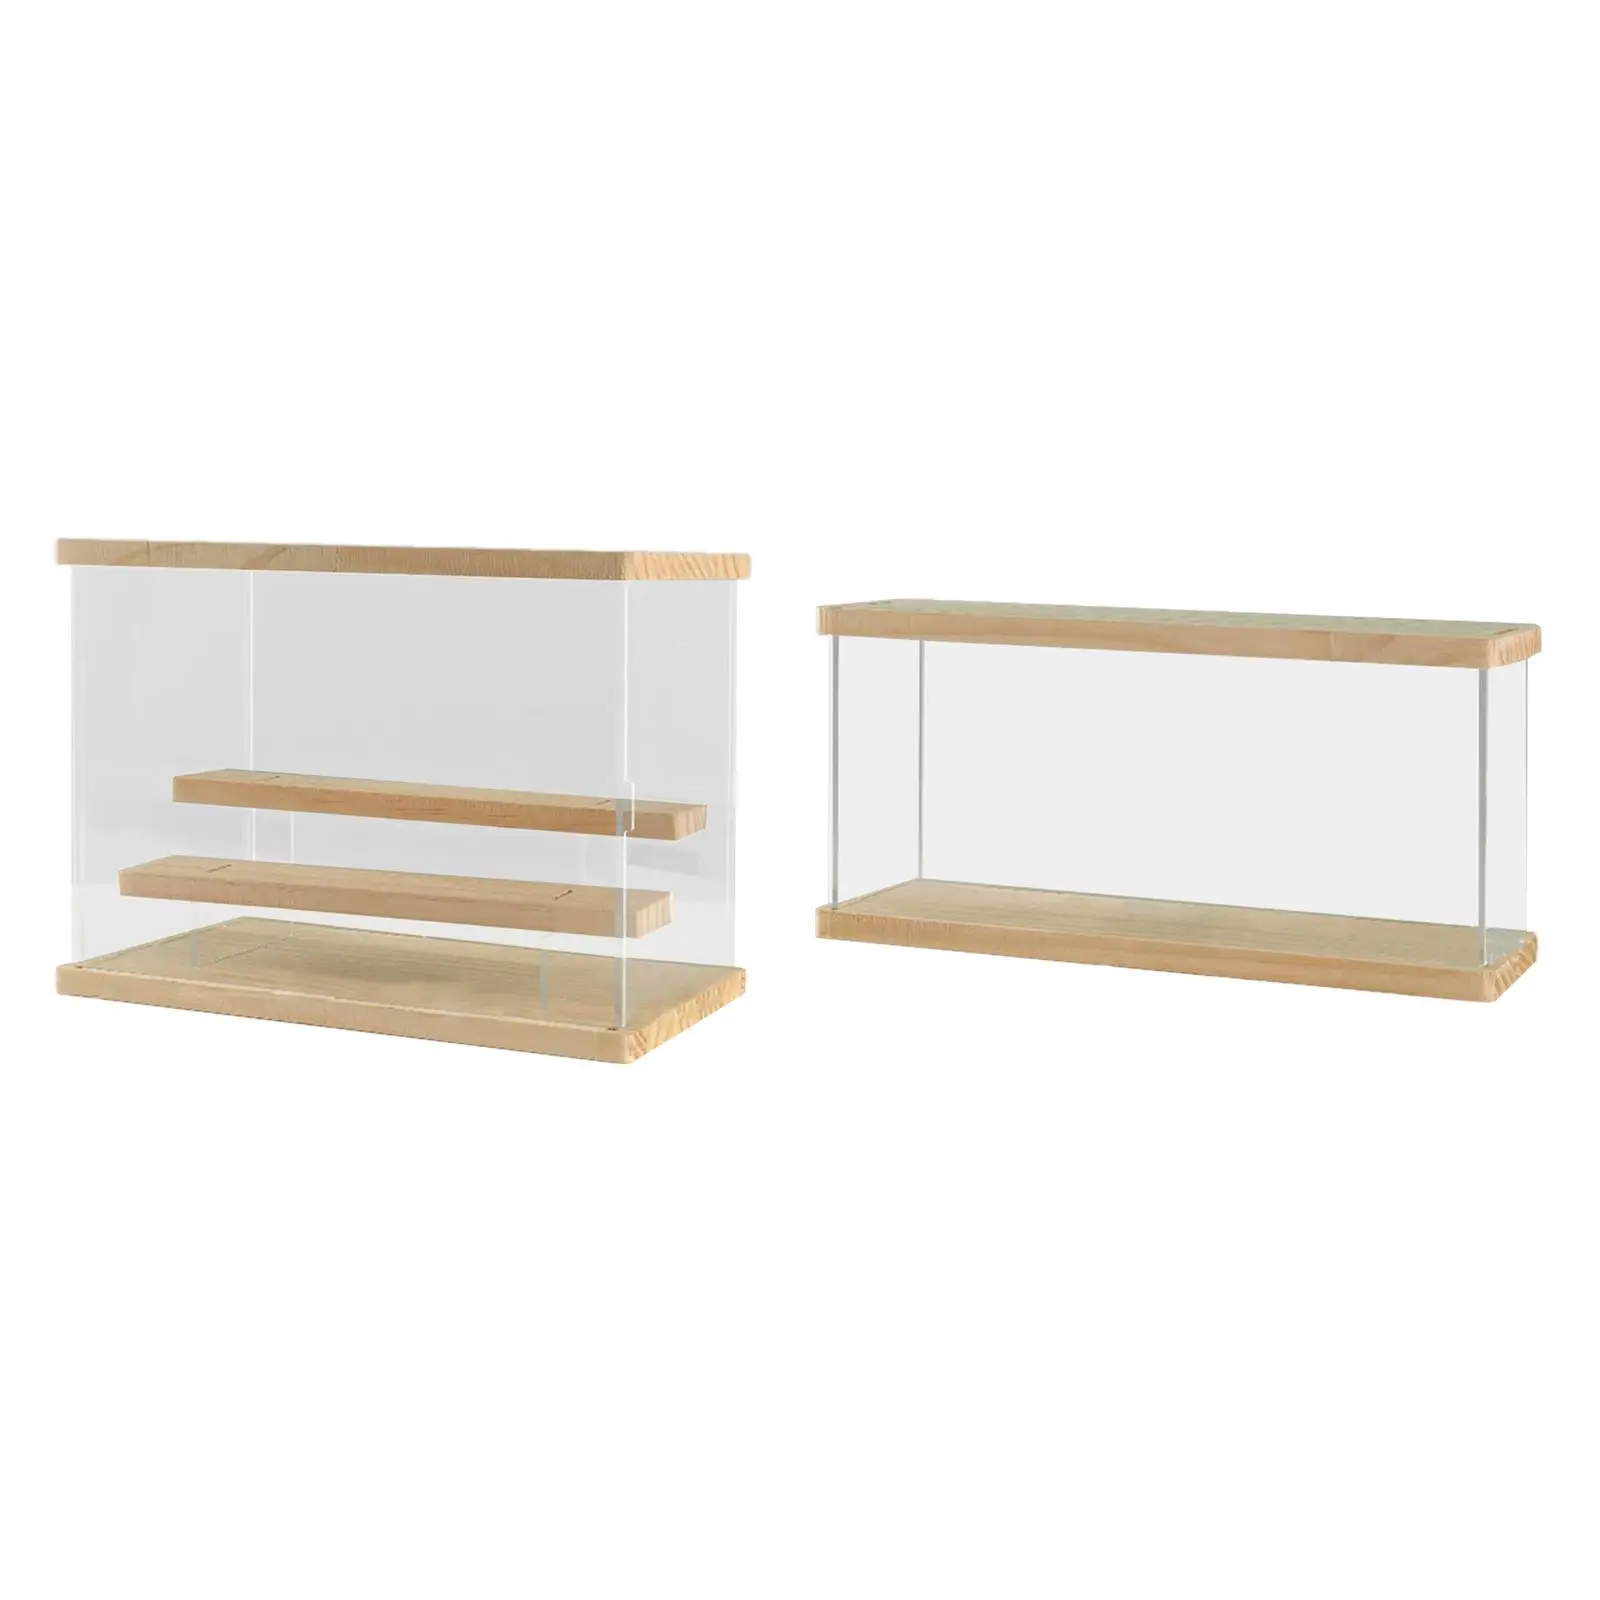 Display Storage Box Protection Organizing Dustproof Showcase Acrylic Display Case for Action Figures Collectibles Toys